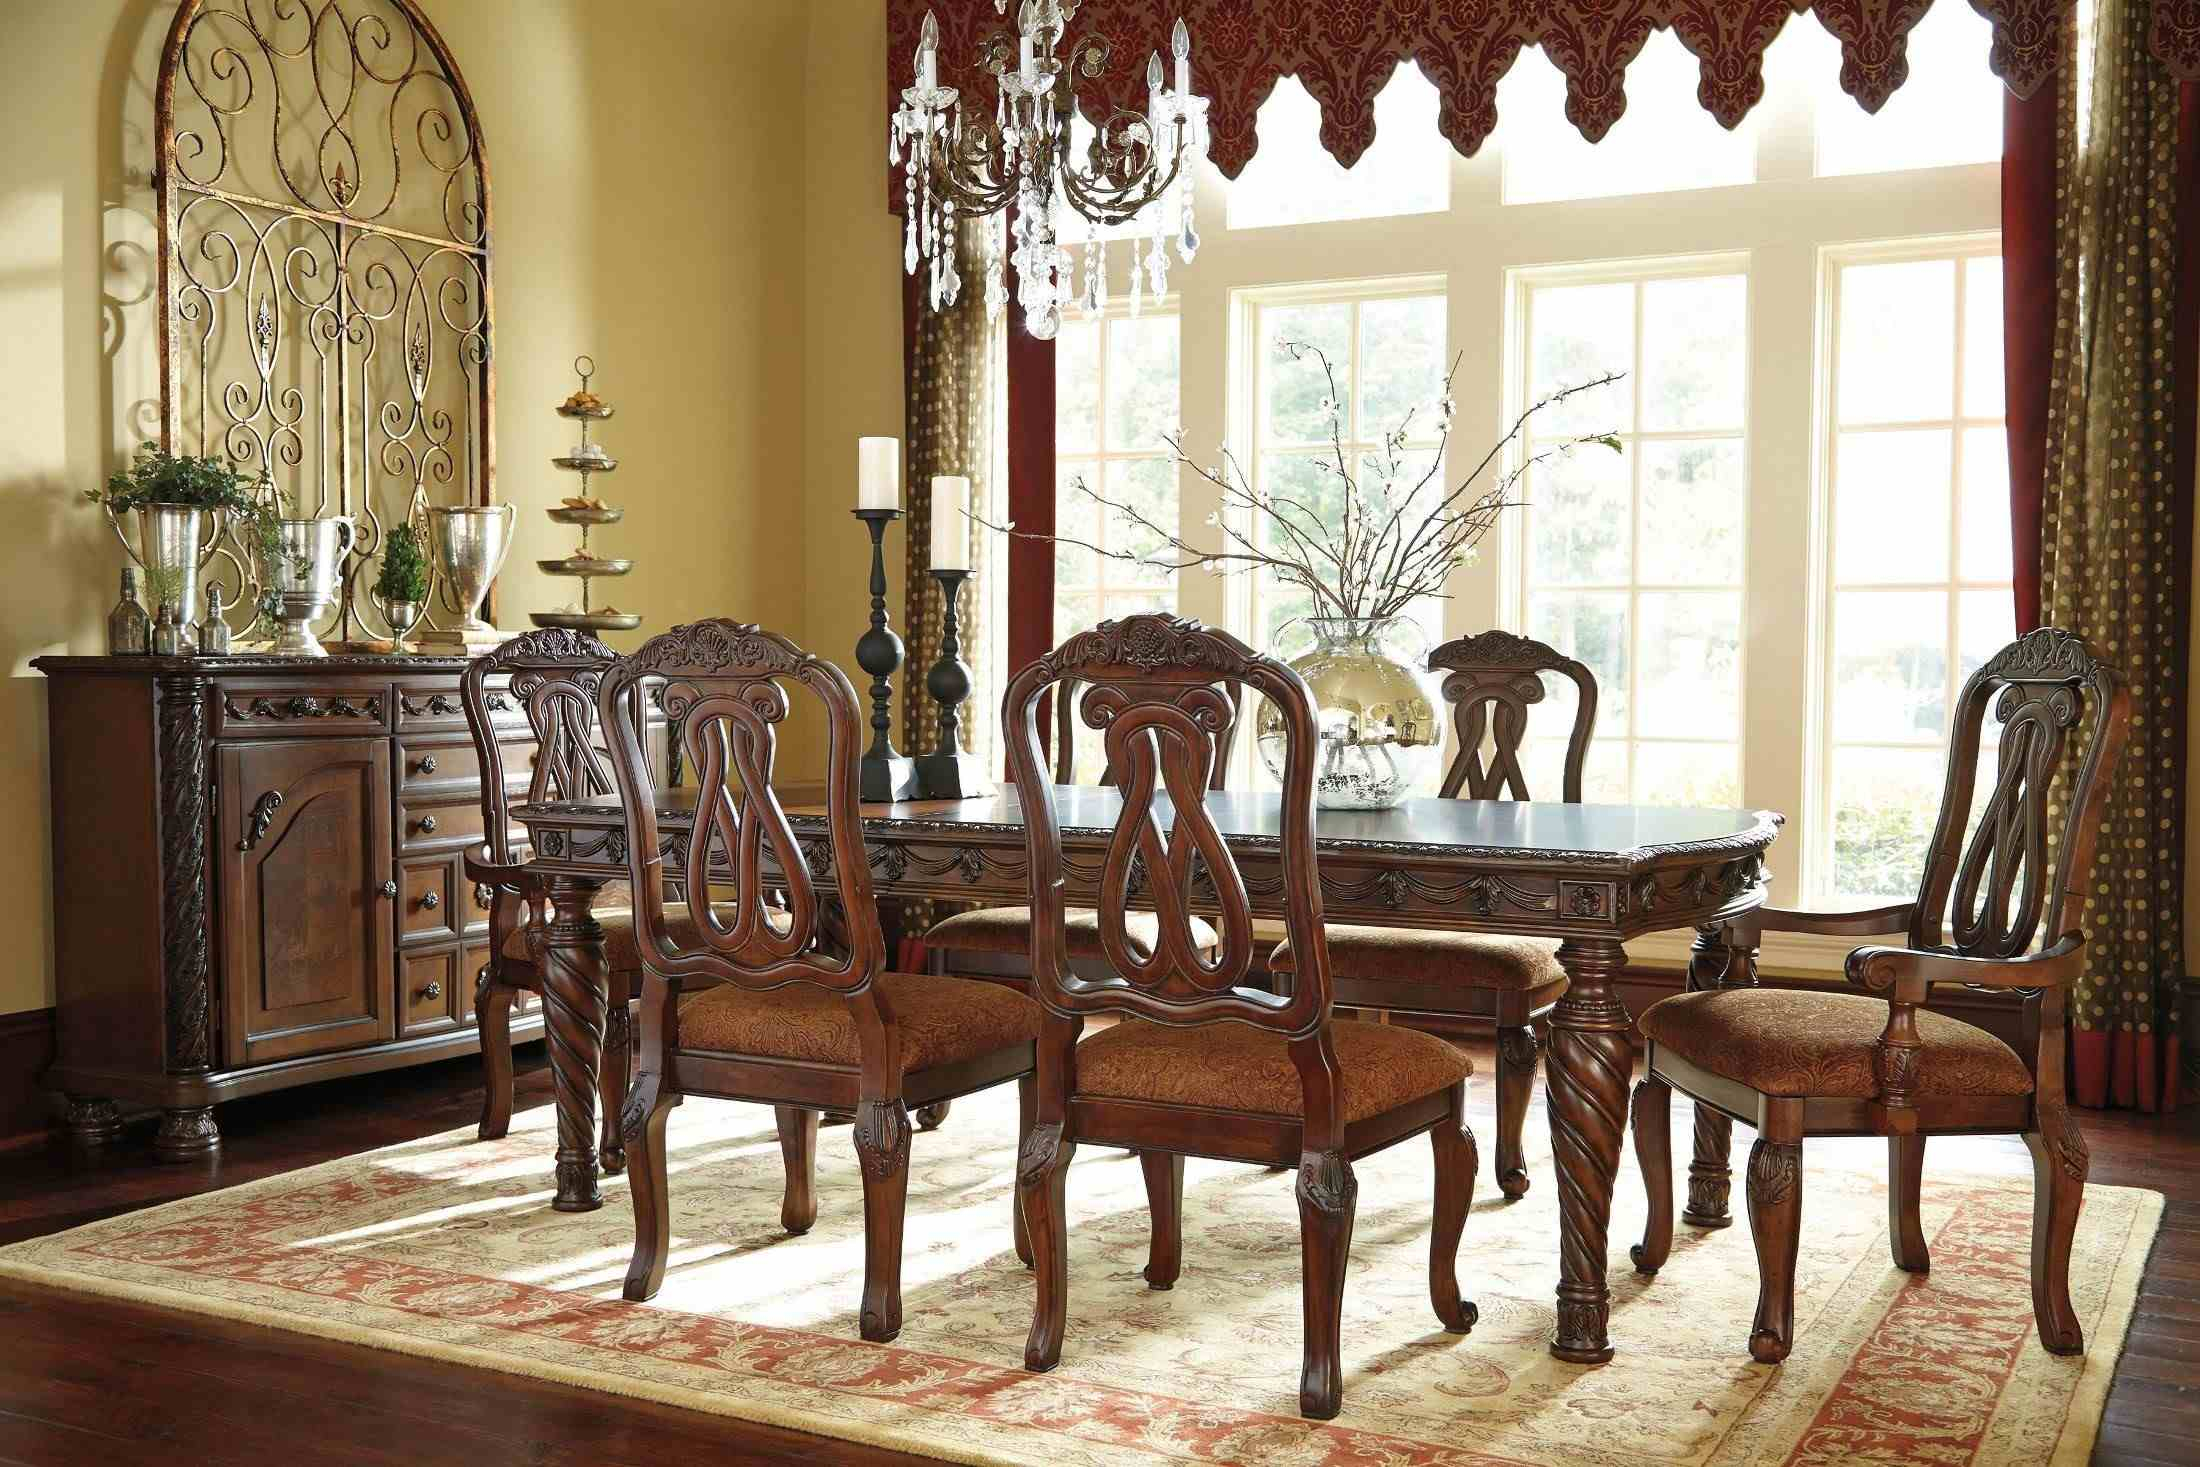 Dining Room Chairs Kijiji Calgary Best Of Dining Room intended for measurements 2200 X 1467